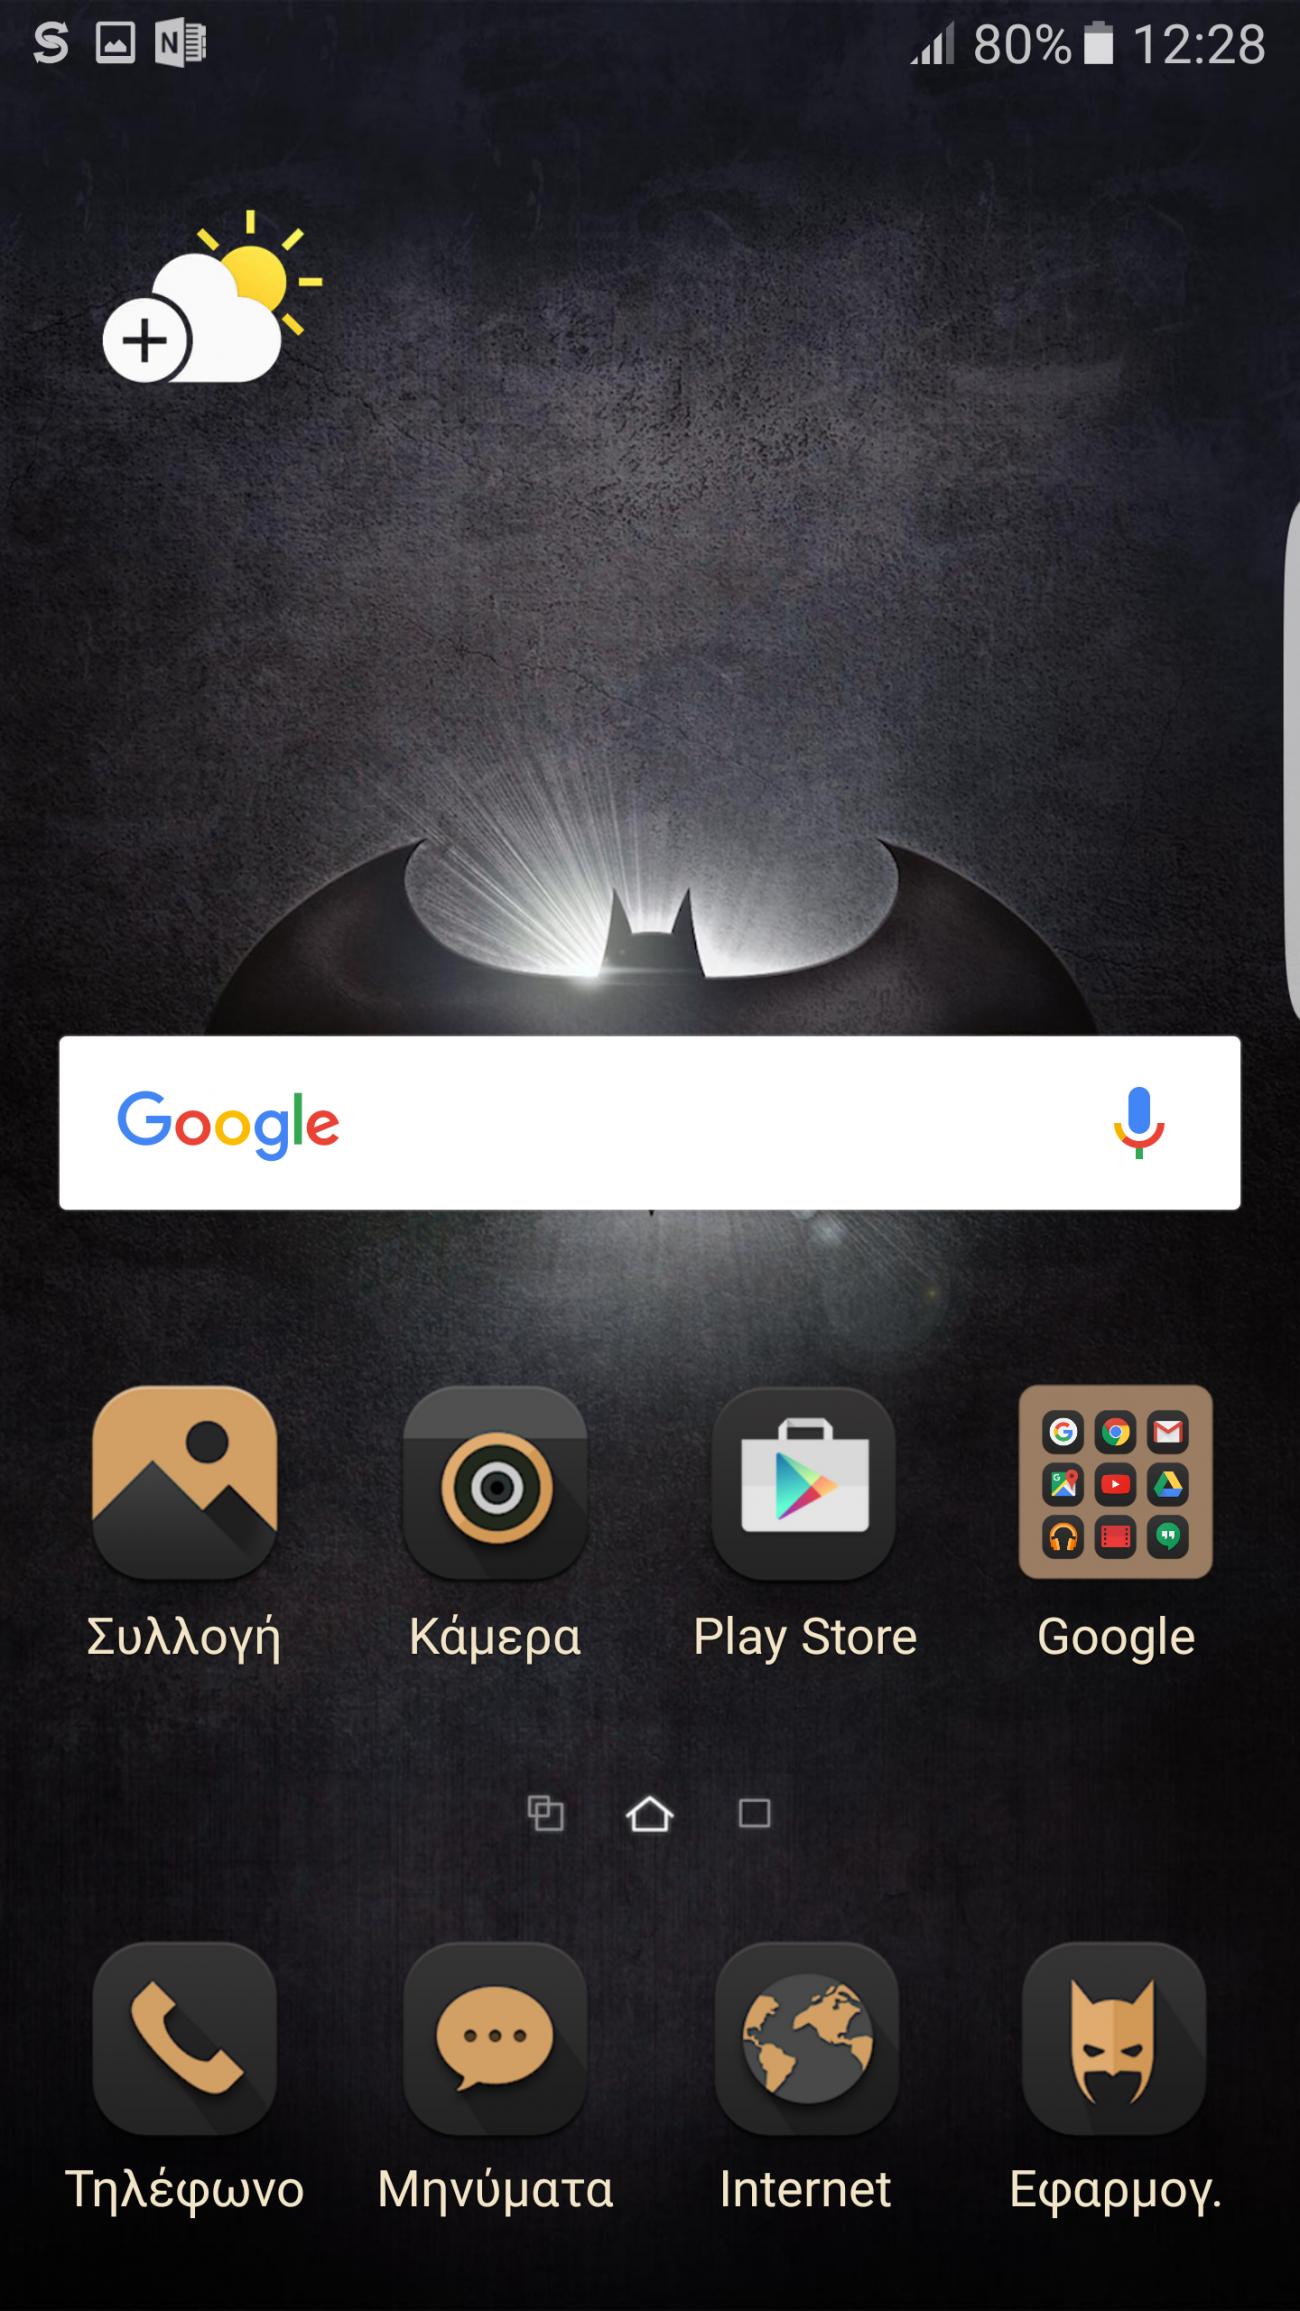 Injustice theme Apk for Galaxy S7 Edge